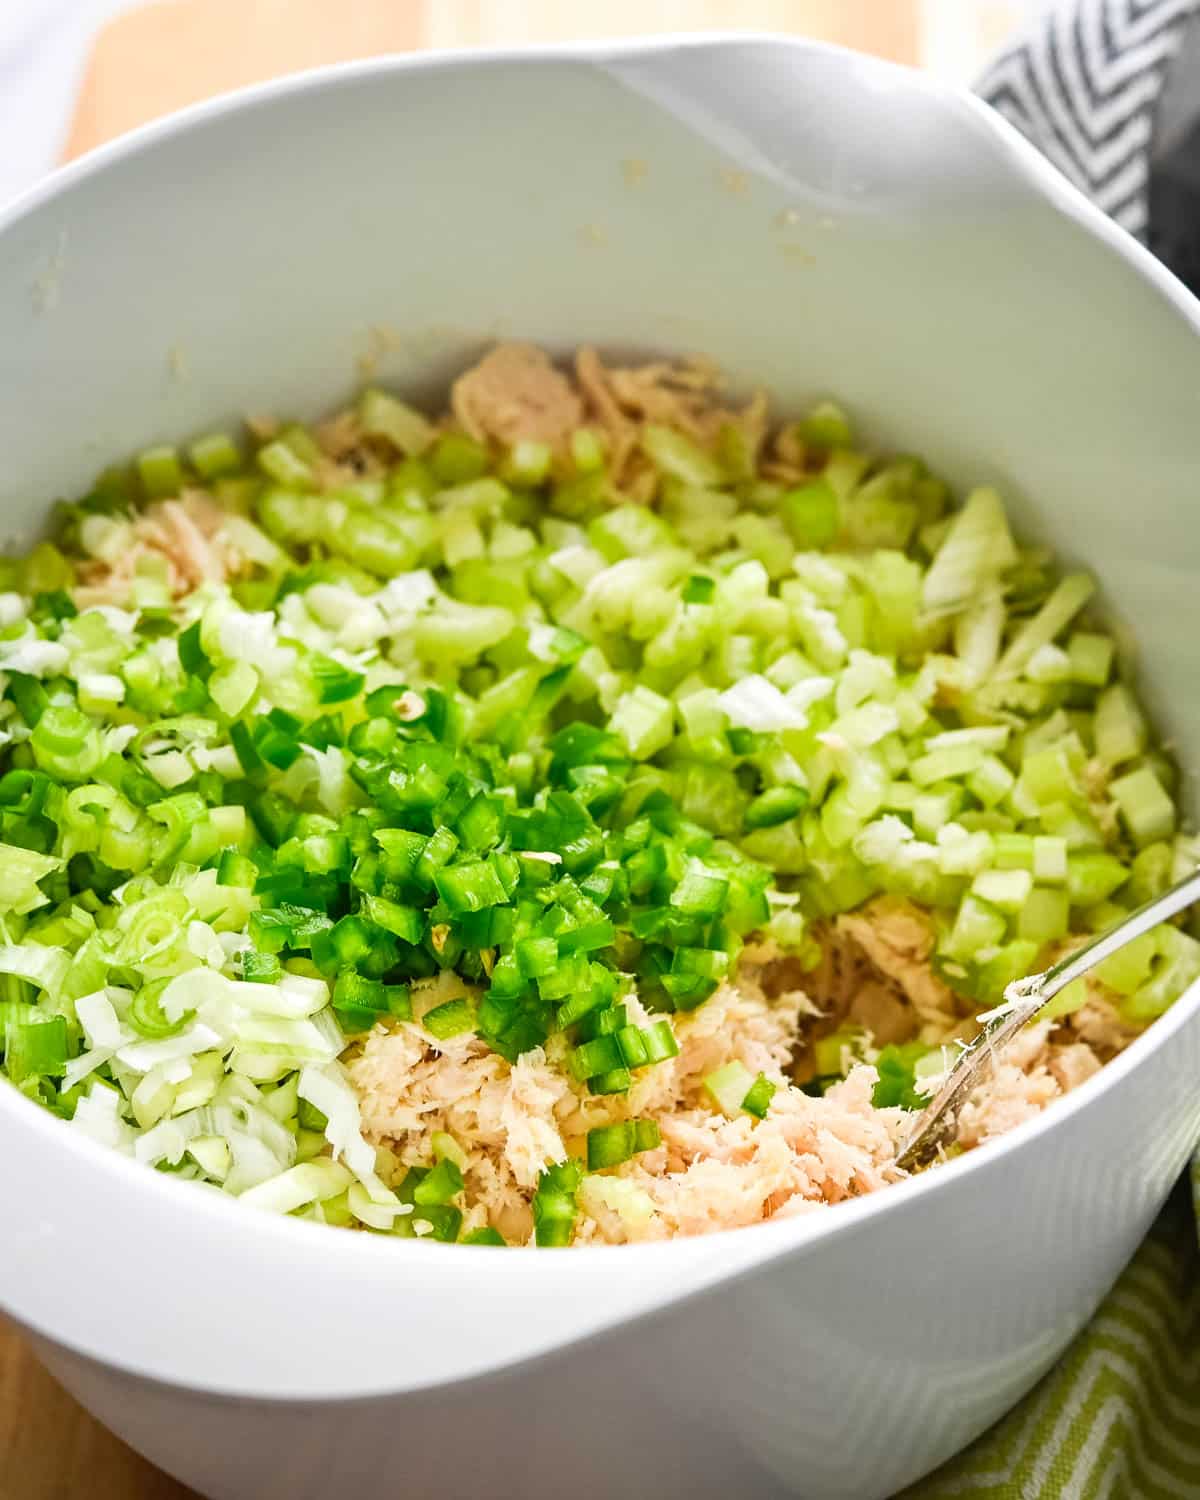 Adding fresh celery, onions and jalapenos to the flaked canned tuna.